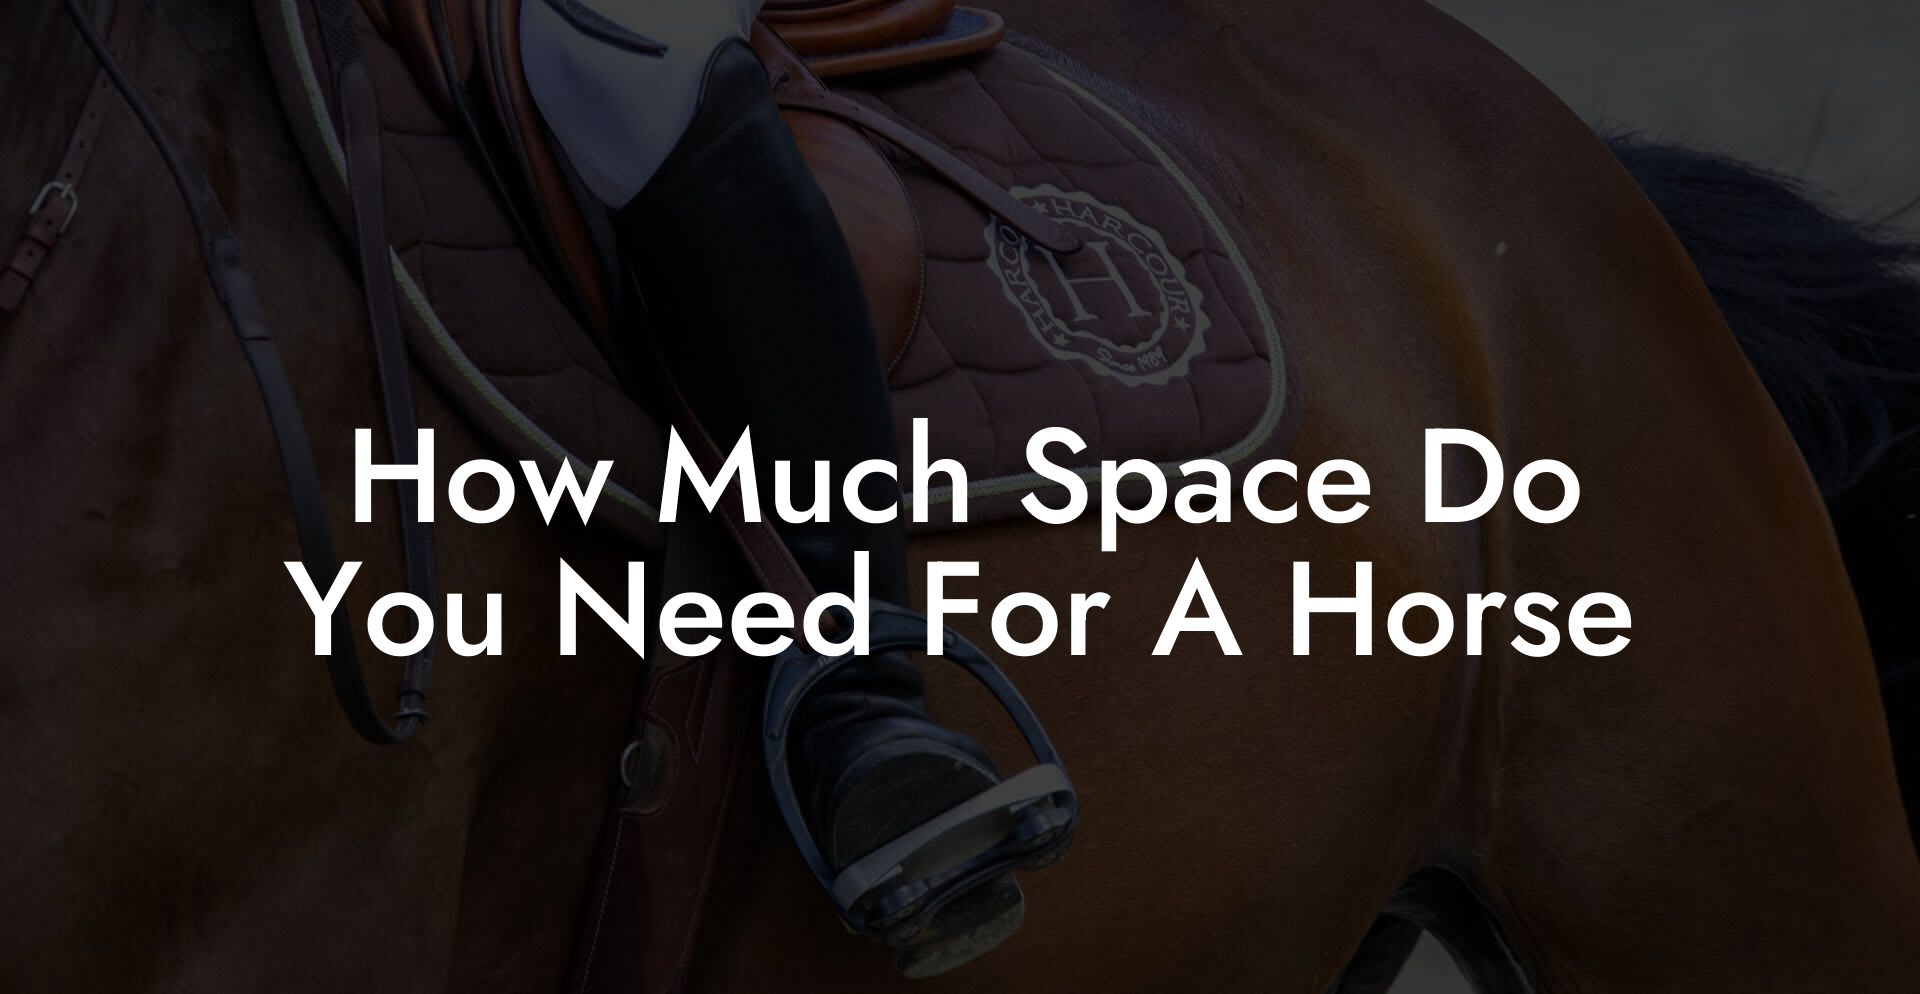 How Much Space Do You Need For A Horse